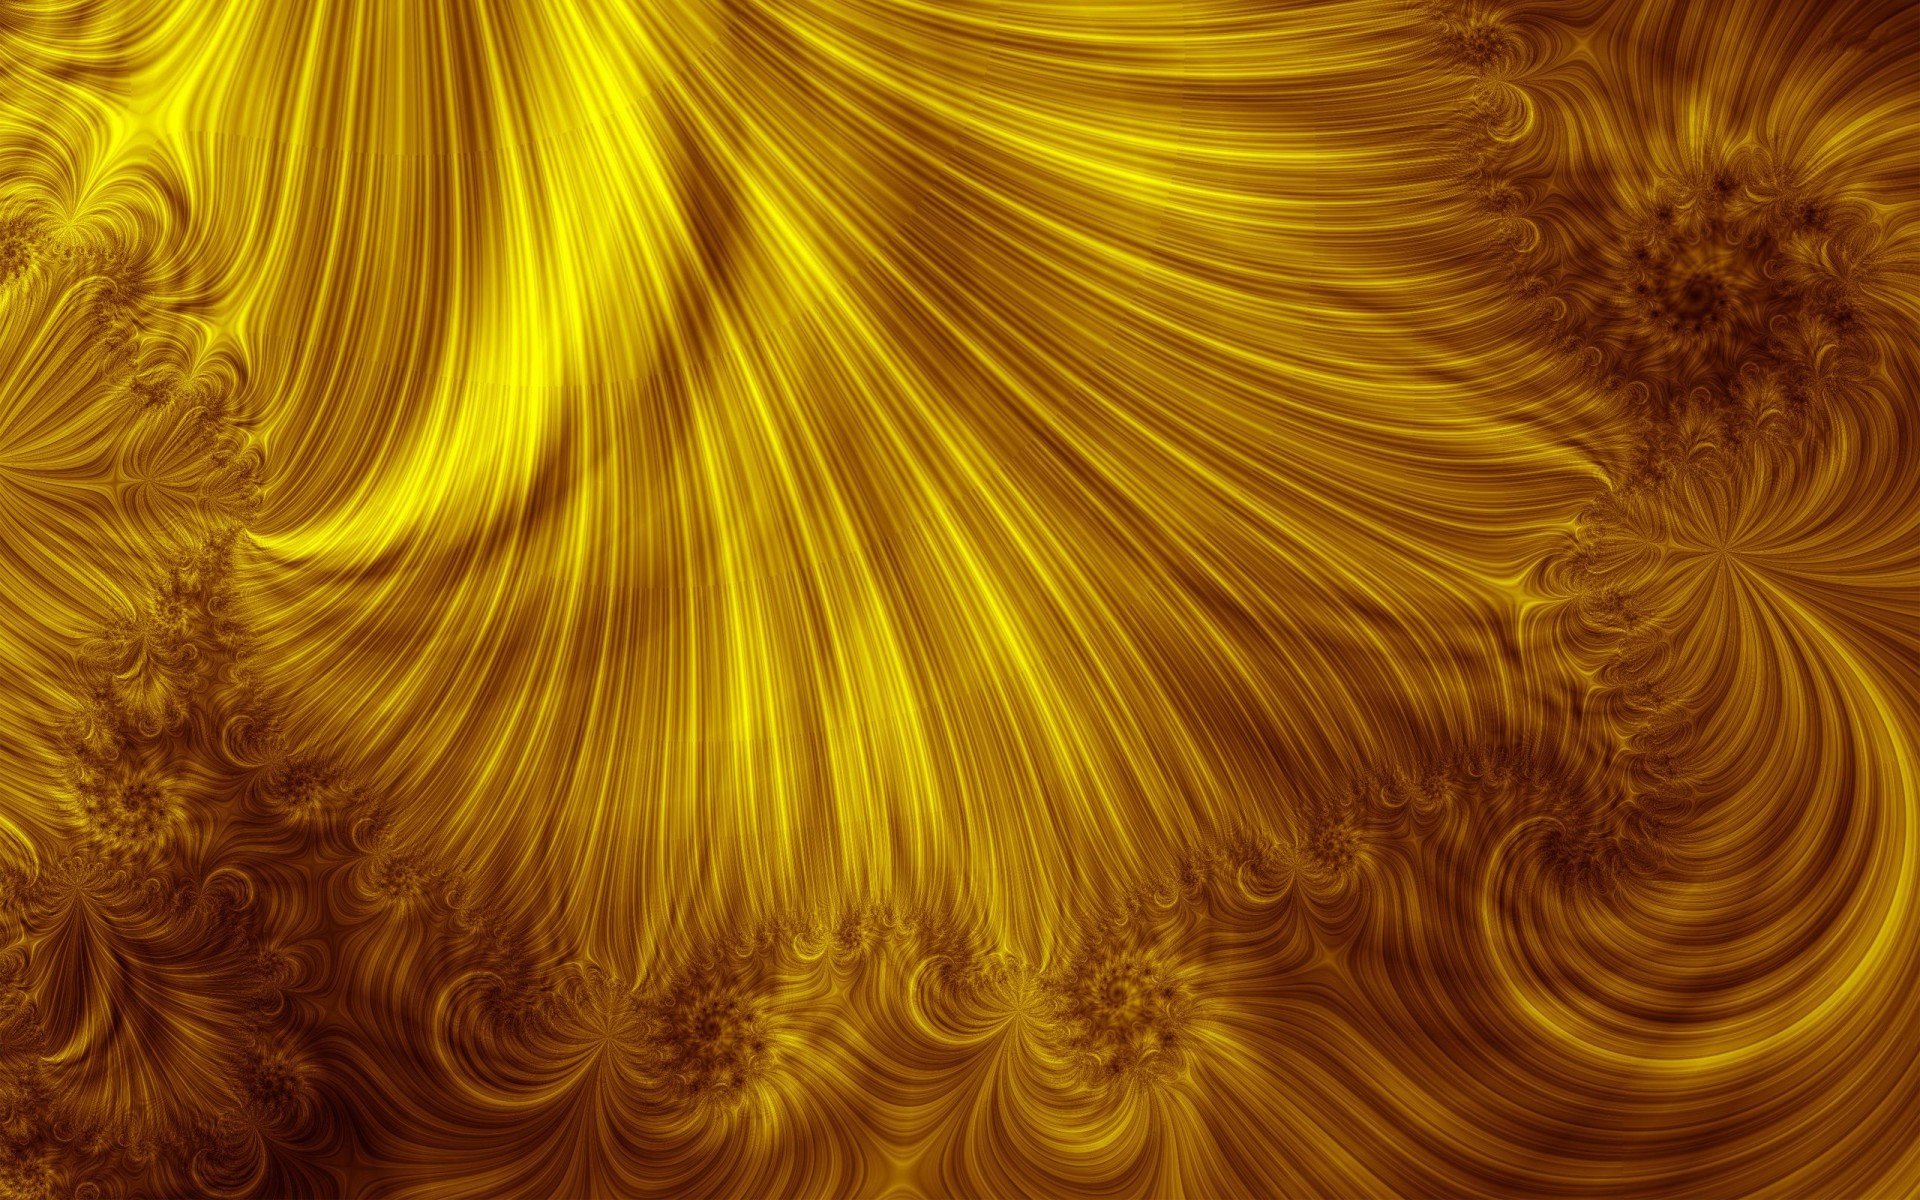 Gold Abstract wallpaper HD for desktop background